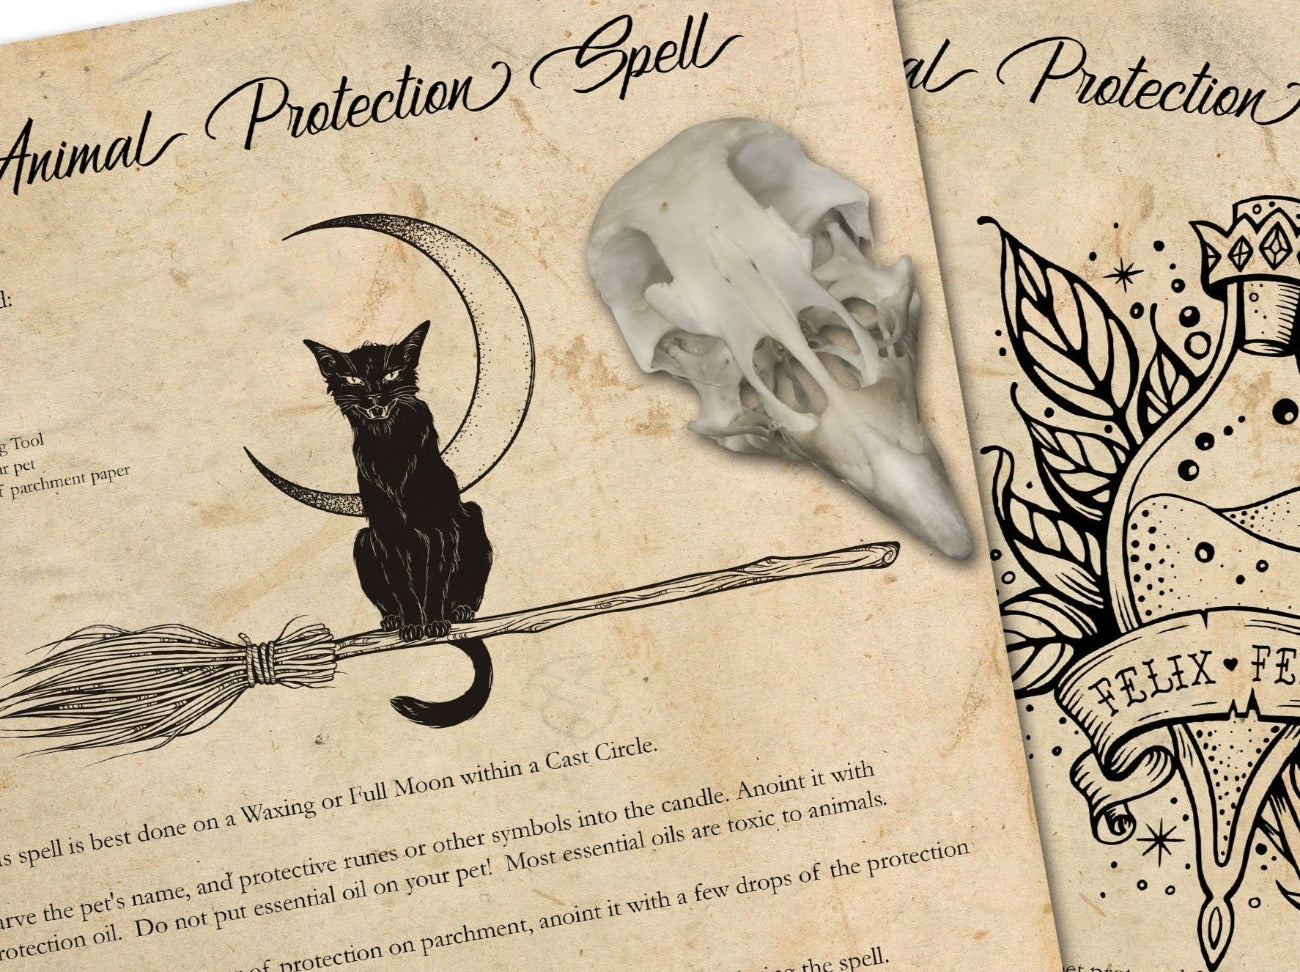 PET PROTECTION SPELL, Protection Magic Spell for Furbabies, Protect a Pet - Morgana Magick Spell